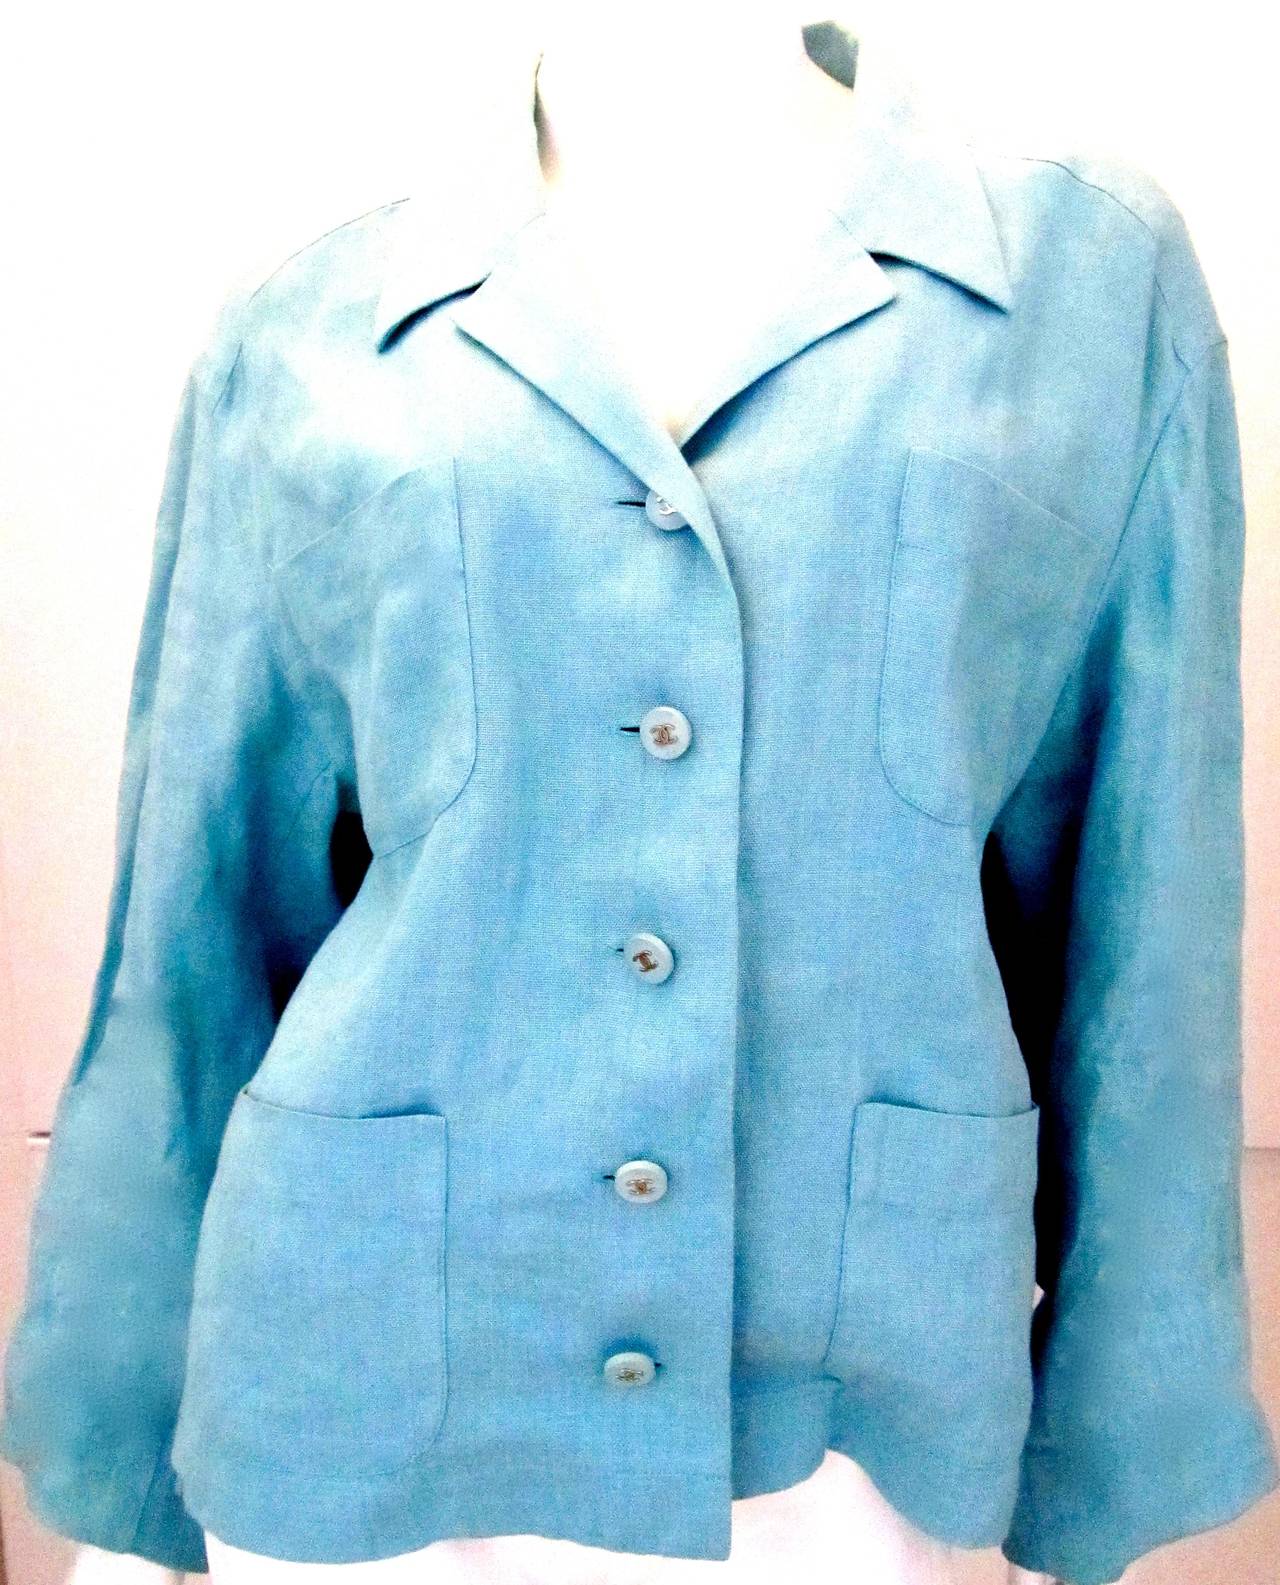 Chanel Light Aqua Blue Linen Jacket. Size 36. Gorgeous color of linen that is great for various occasions and weather. In excellent condition. Vintage piece from the Spring of 1996 line. Beautiful piece that can be worn with sleeves rolled up or